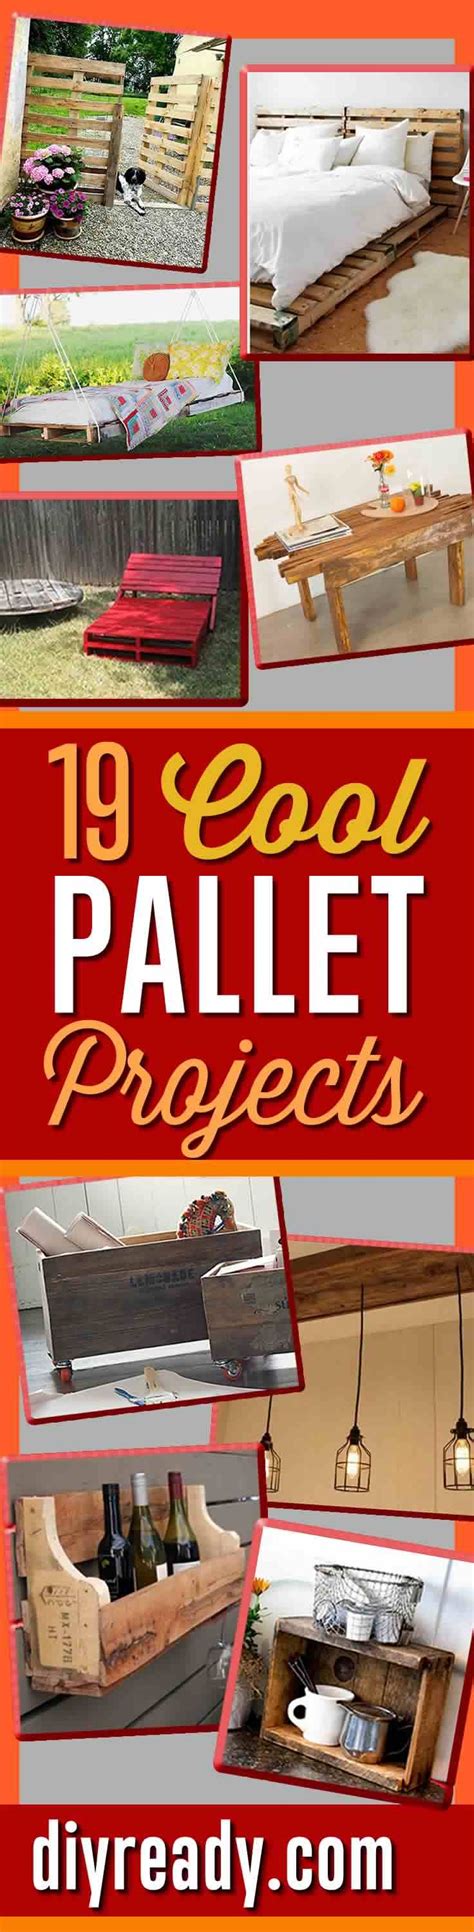 Cool DIY Pallet Projects and DIY Pallet Furniture | Coffee Table, Pallet Bed, Pallet Swing ...